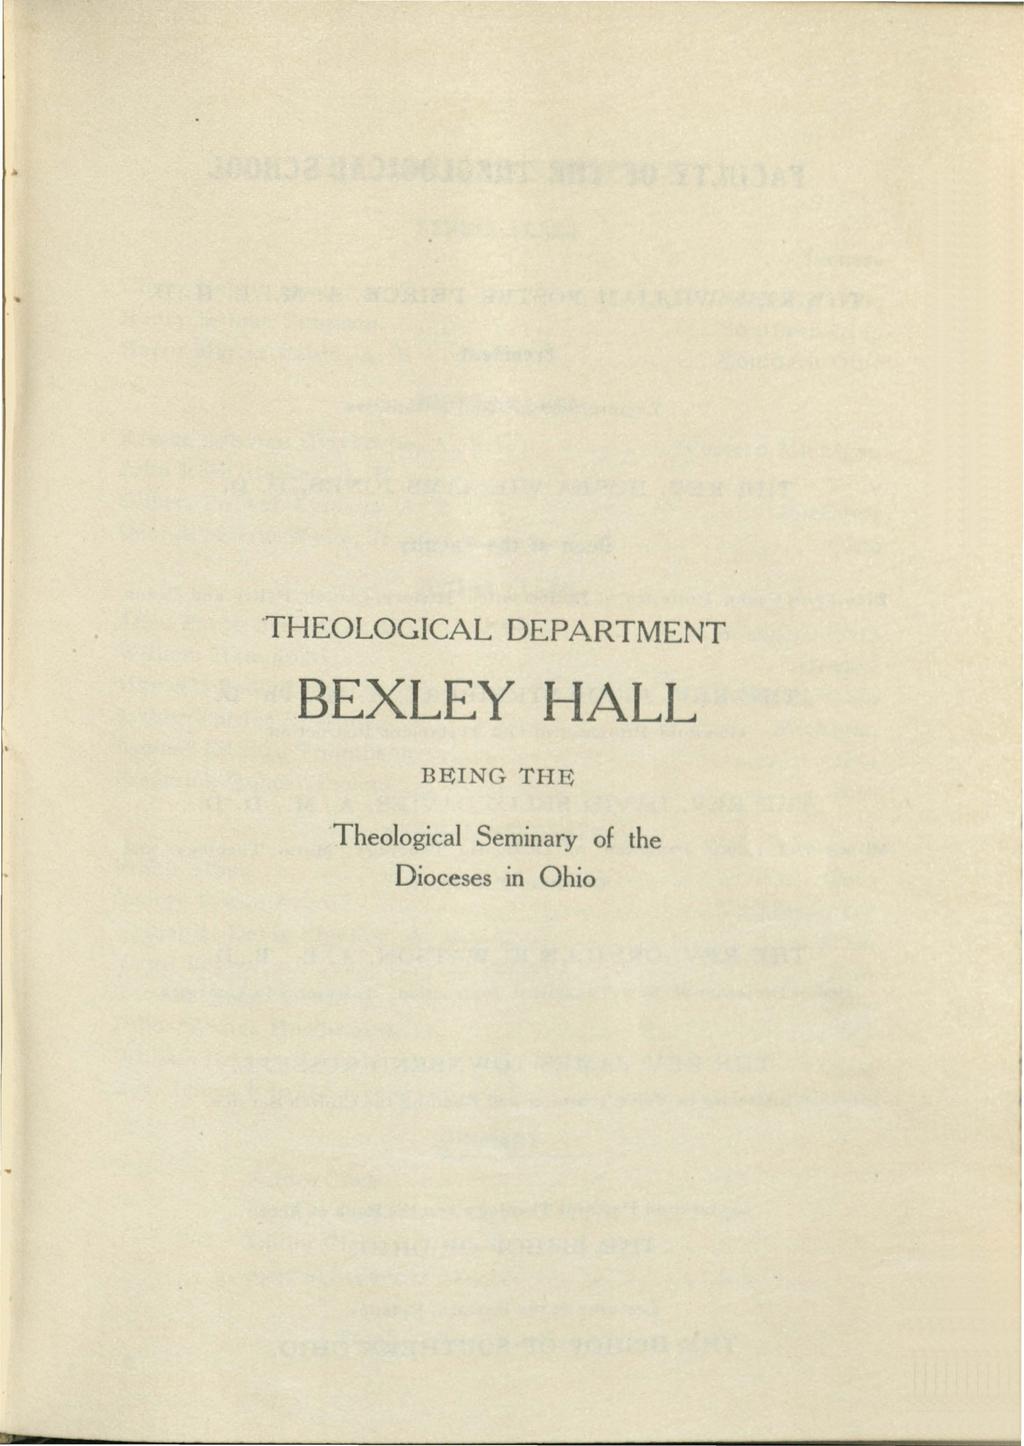 THEOLOGICAL DEPARTMENT BEXLEY HALL BEING THE